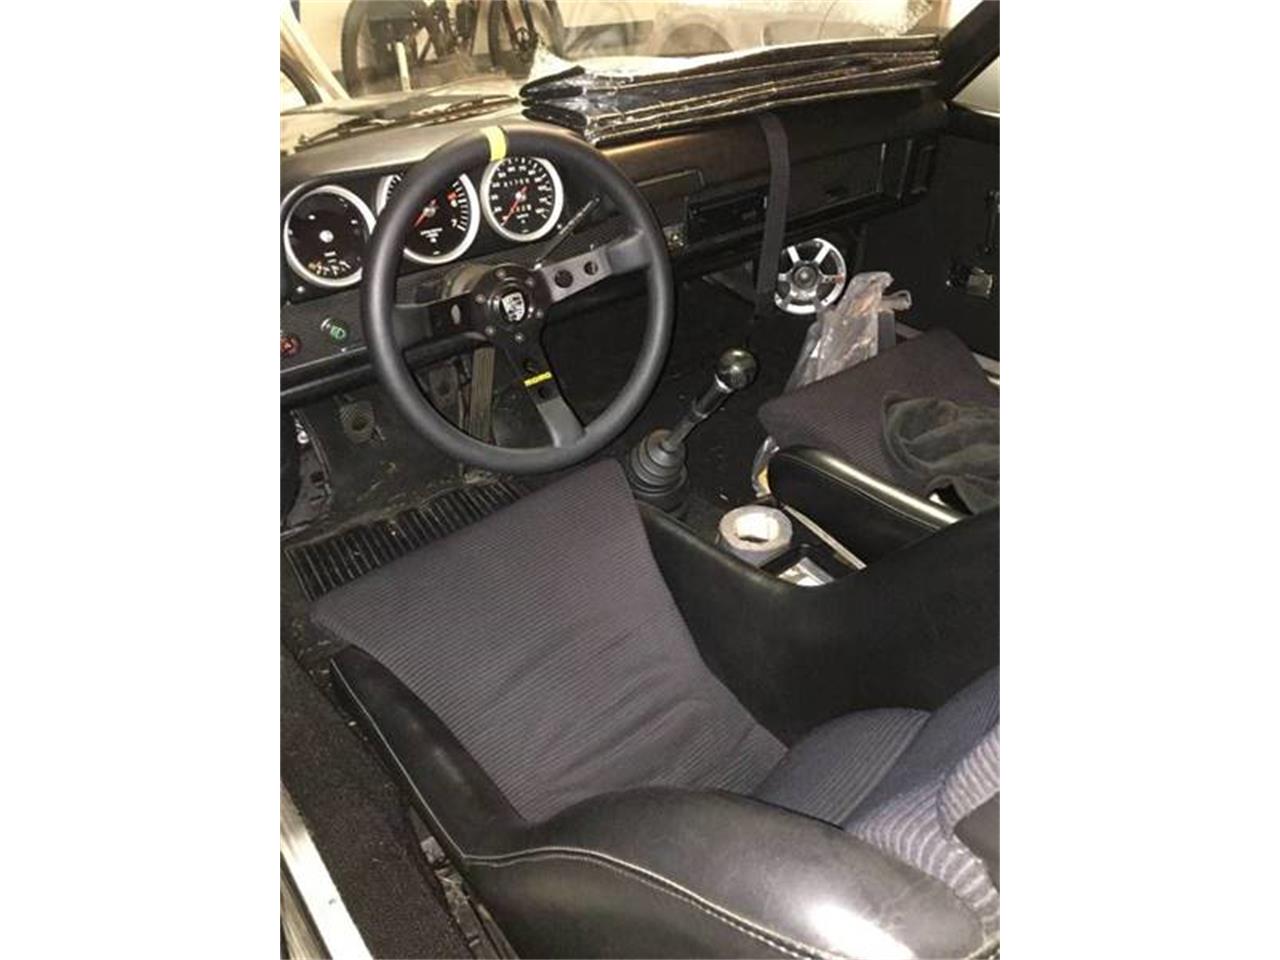 1972 Porsche 914 for sale in Long Island, NY